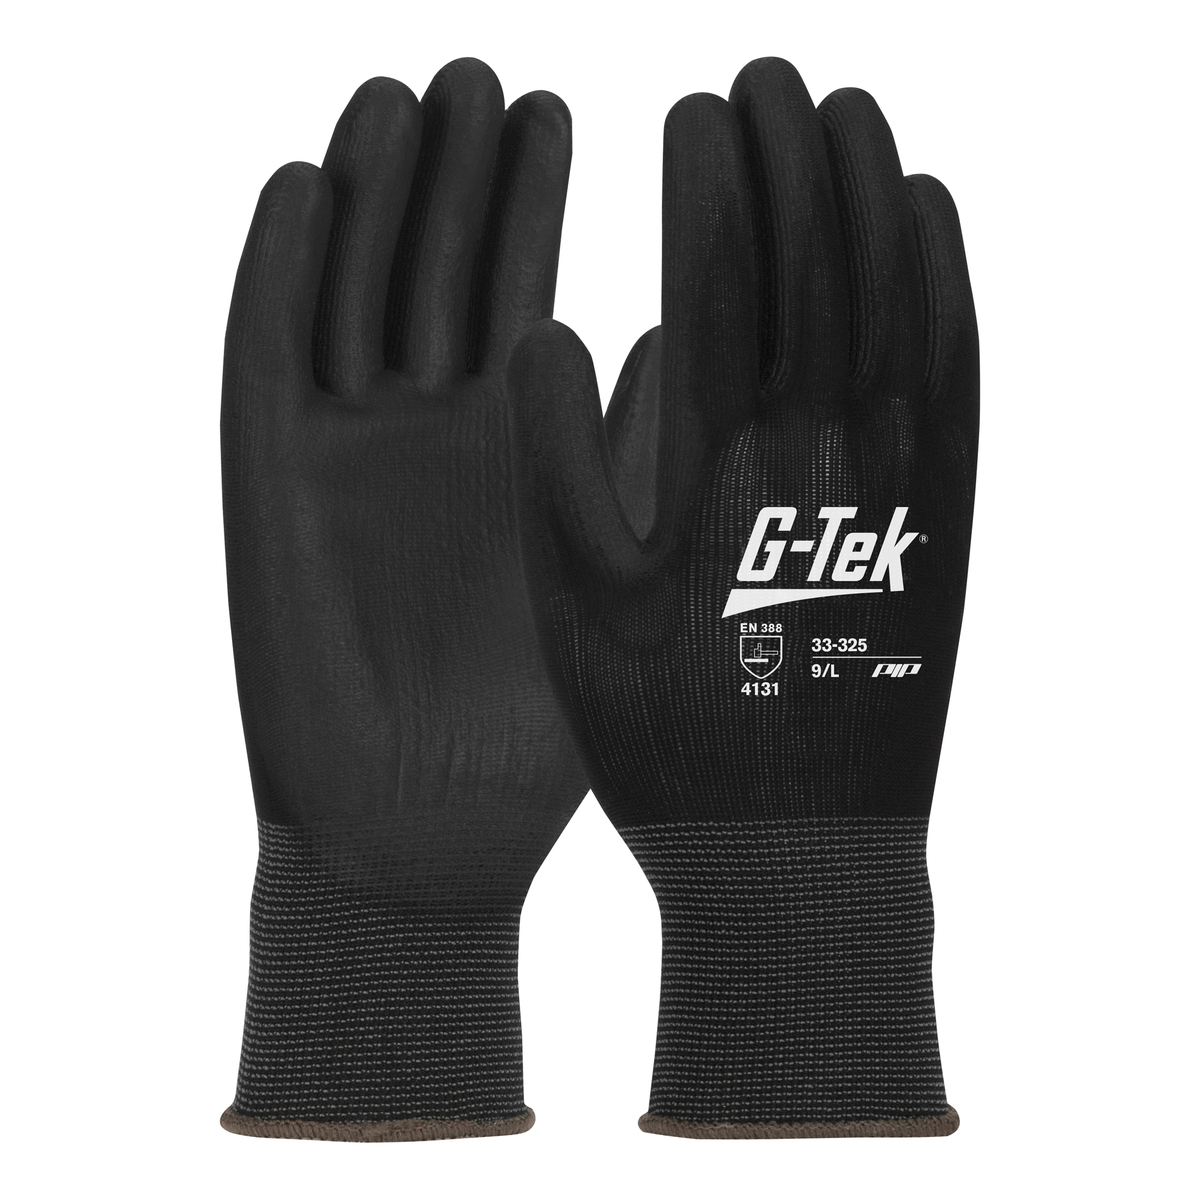 PIP® 2X G-Tek® 13 Gauge Black Polyurethane Palm And Finger Coated Work Gloves With Nylon Liner And Continuous Knit Wrist